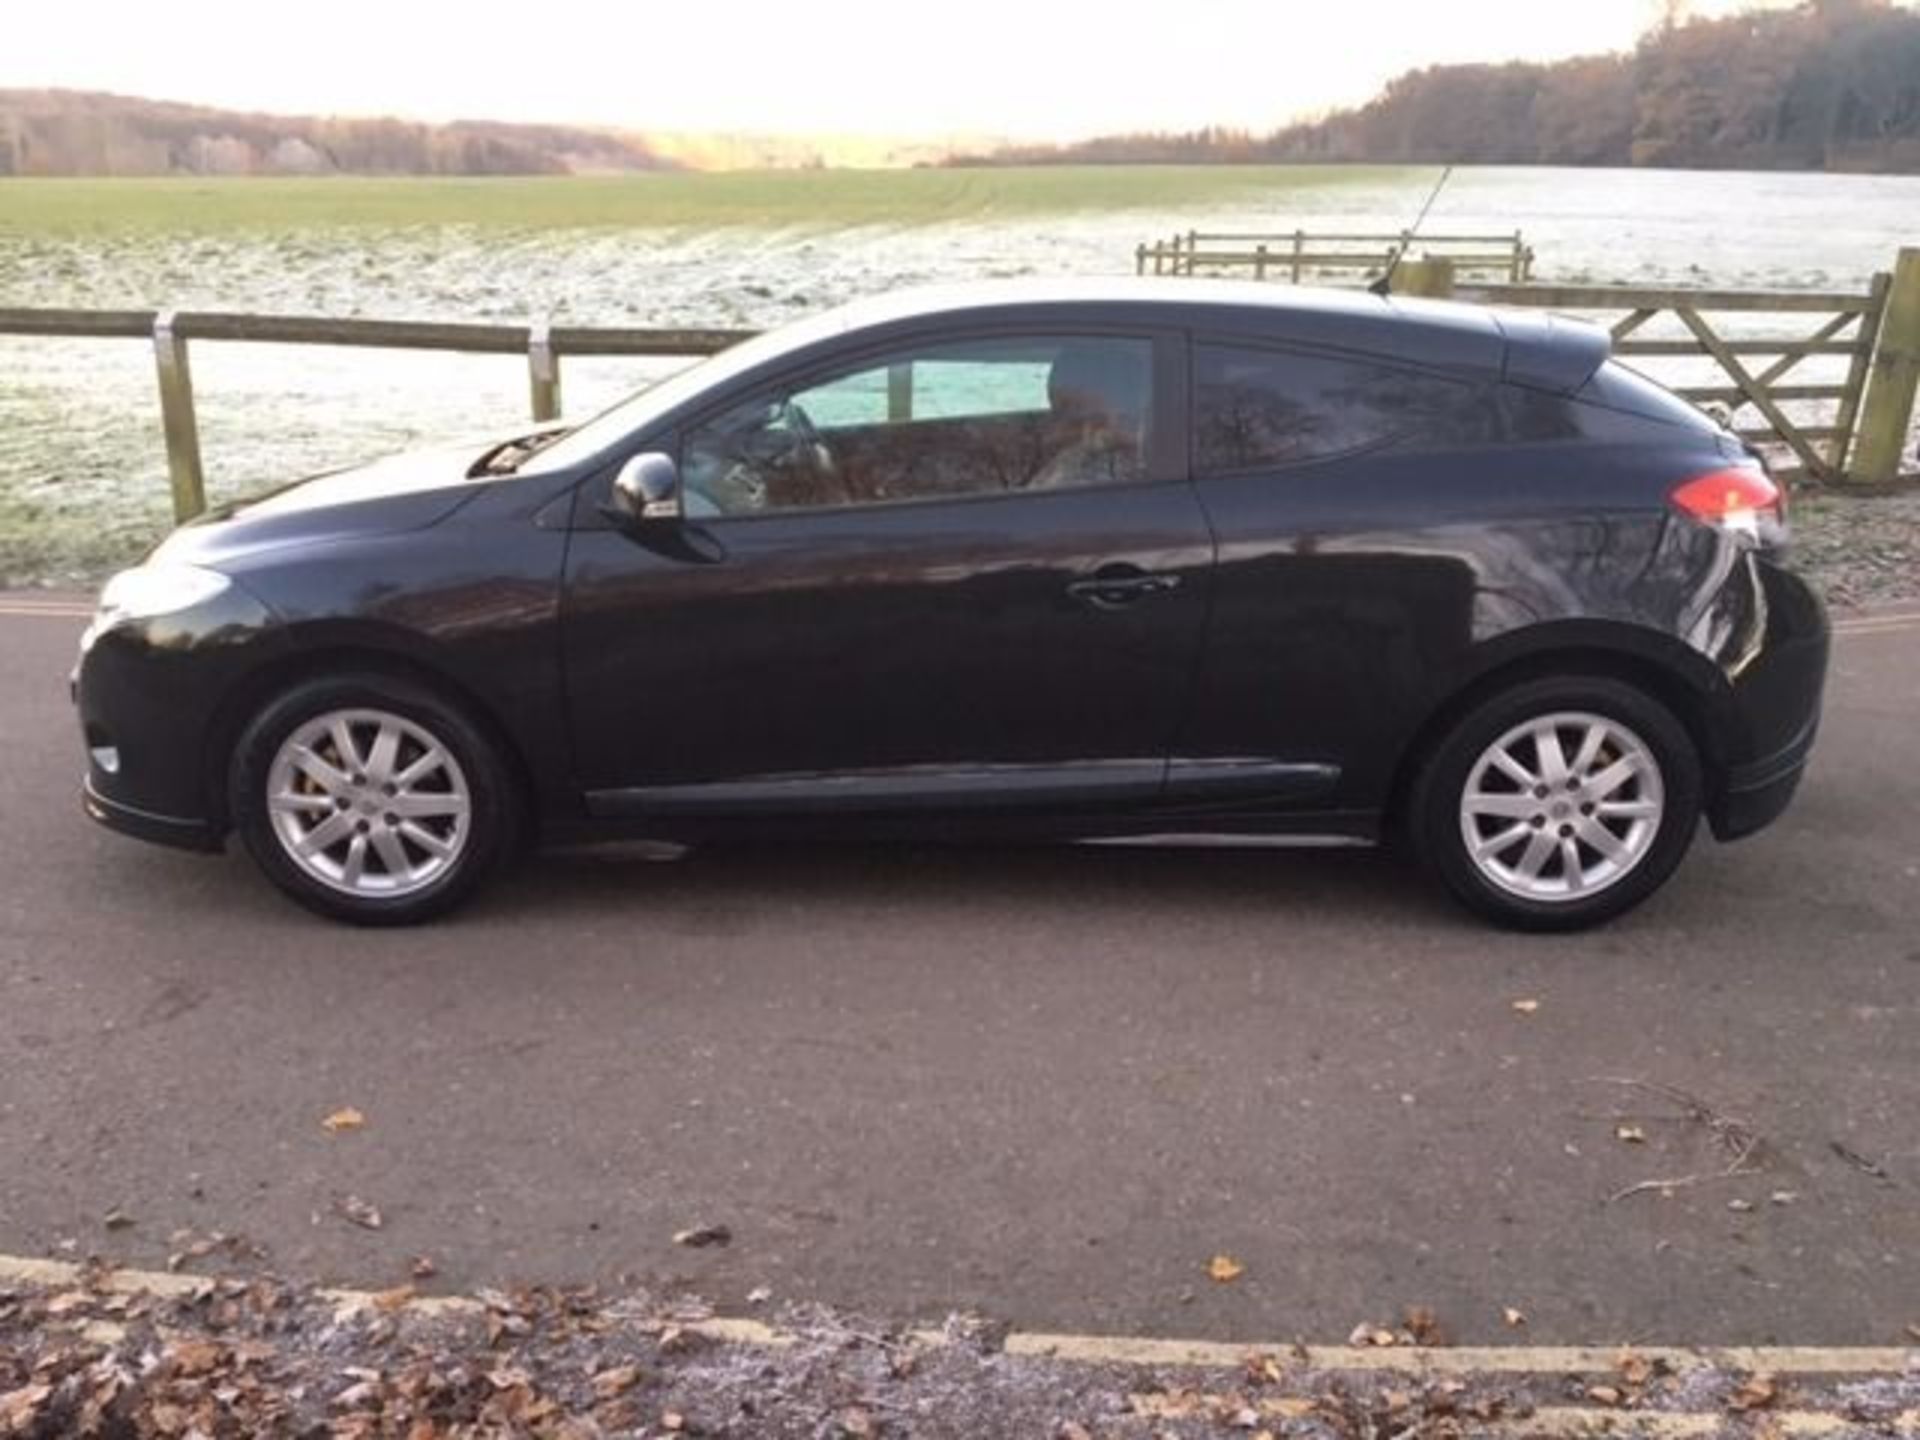 2009 RENAULT MEGANE 1.6 EXPRESSION VVT 110 BHP WITH RS BODY STYLING KIT. 55K MILES 12 MONTHS MOT. - Image 7 of 9